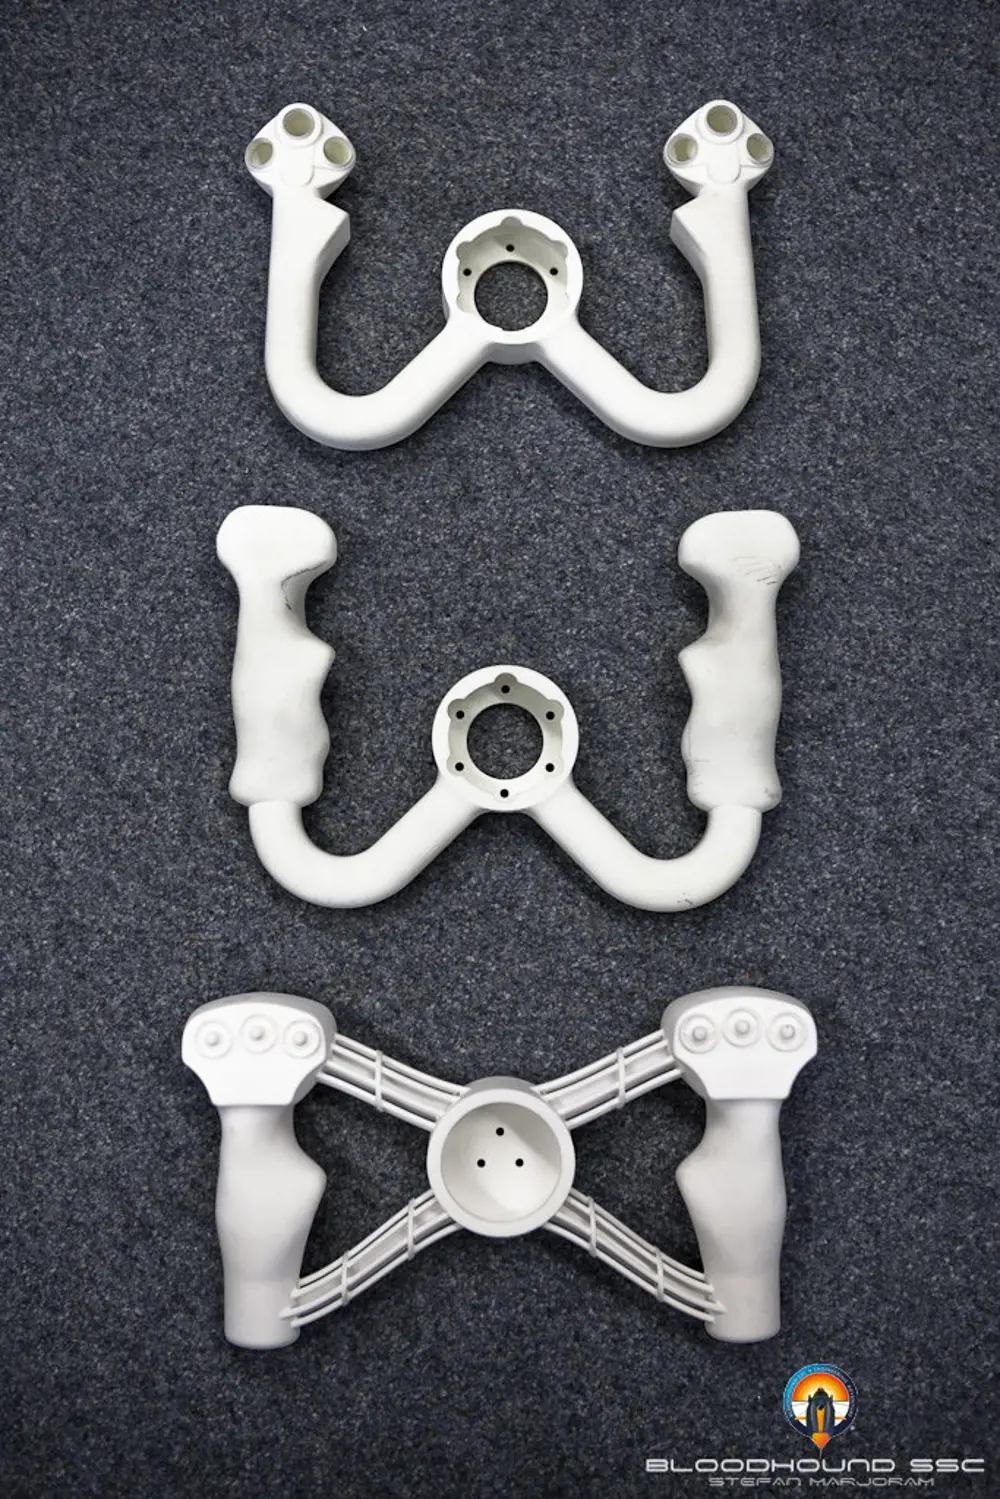 Three 3D-printed prototypes of the bloodhound's steering wheel.